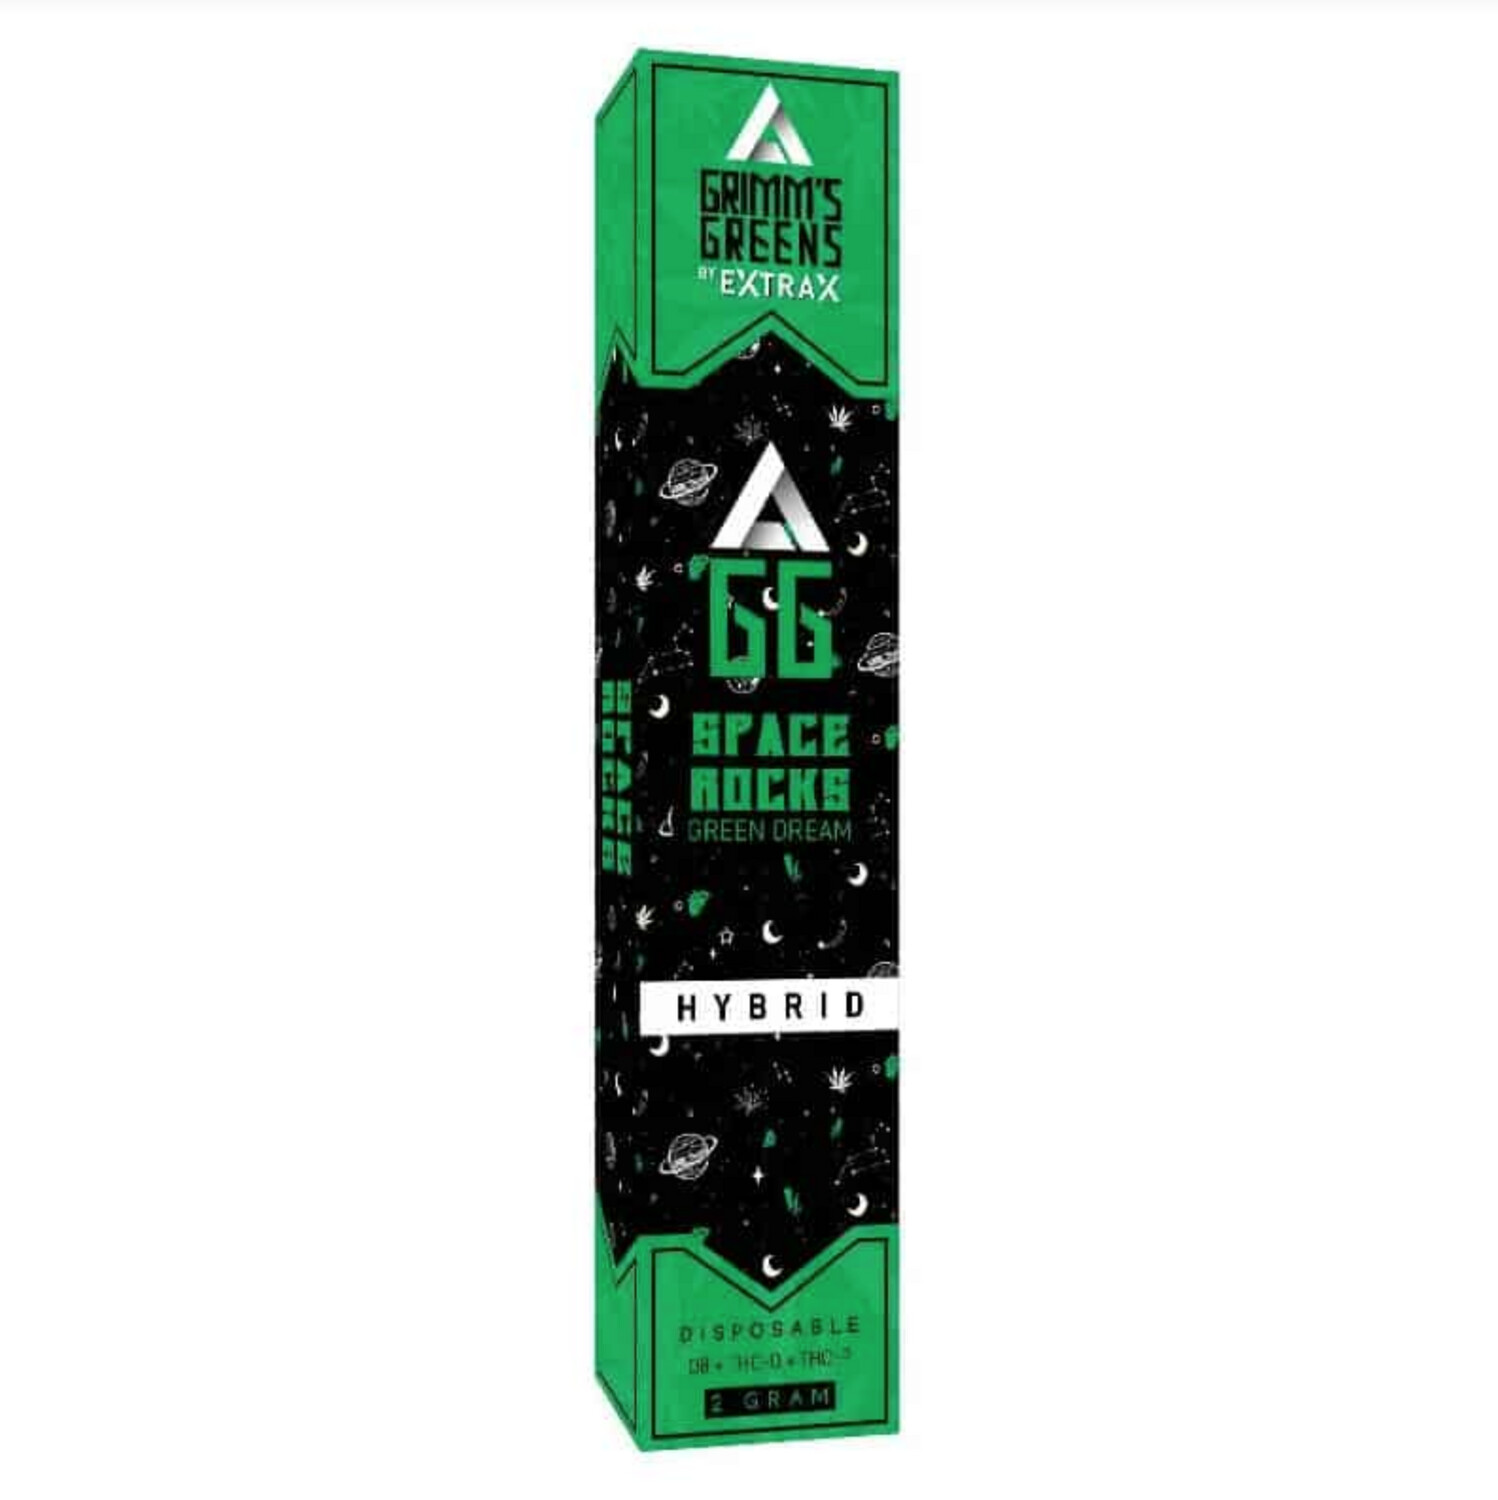 Extrax by Grimm Green "Space Rocks" Disposable (2g, Delta 8 + THCO + THCP)